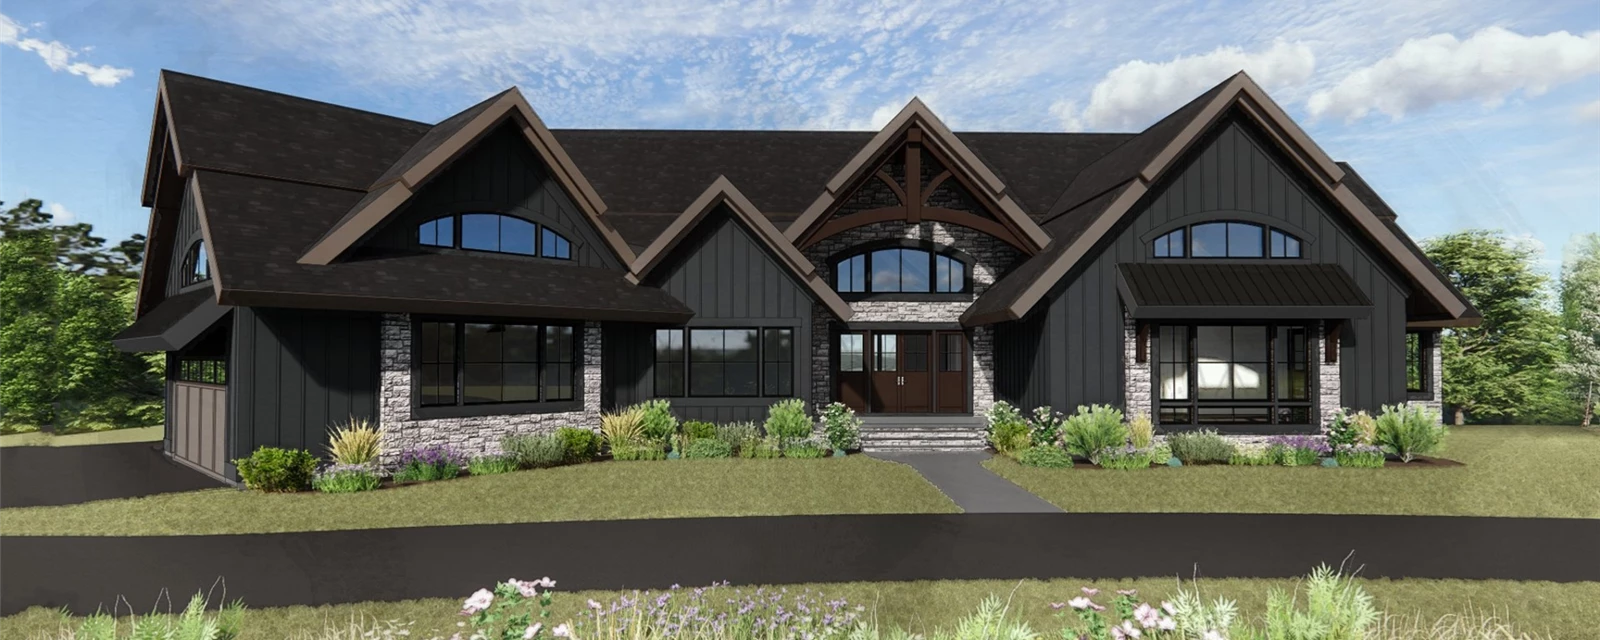 Enchanted Forest Chalet: Exterior Rendering